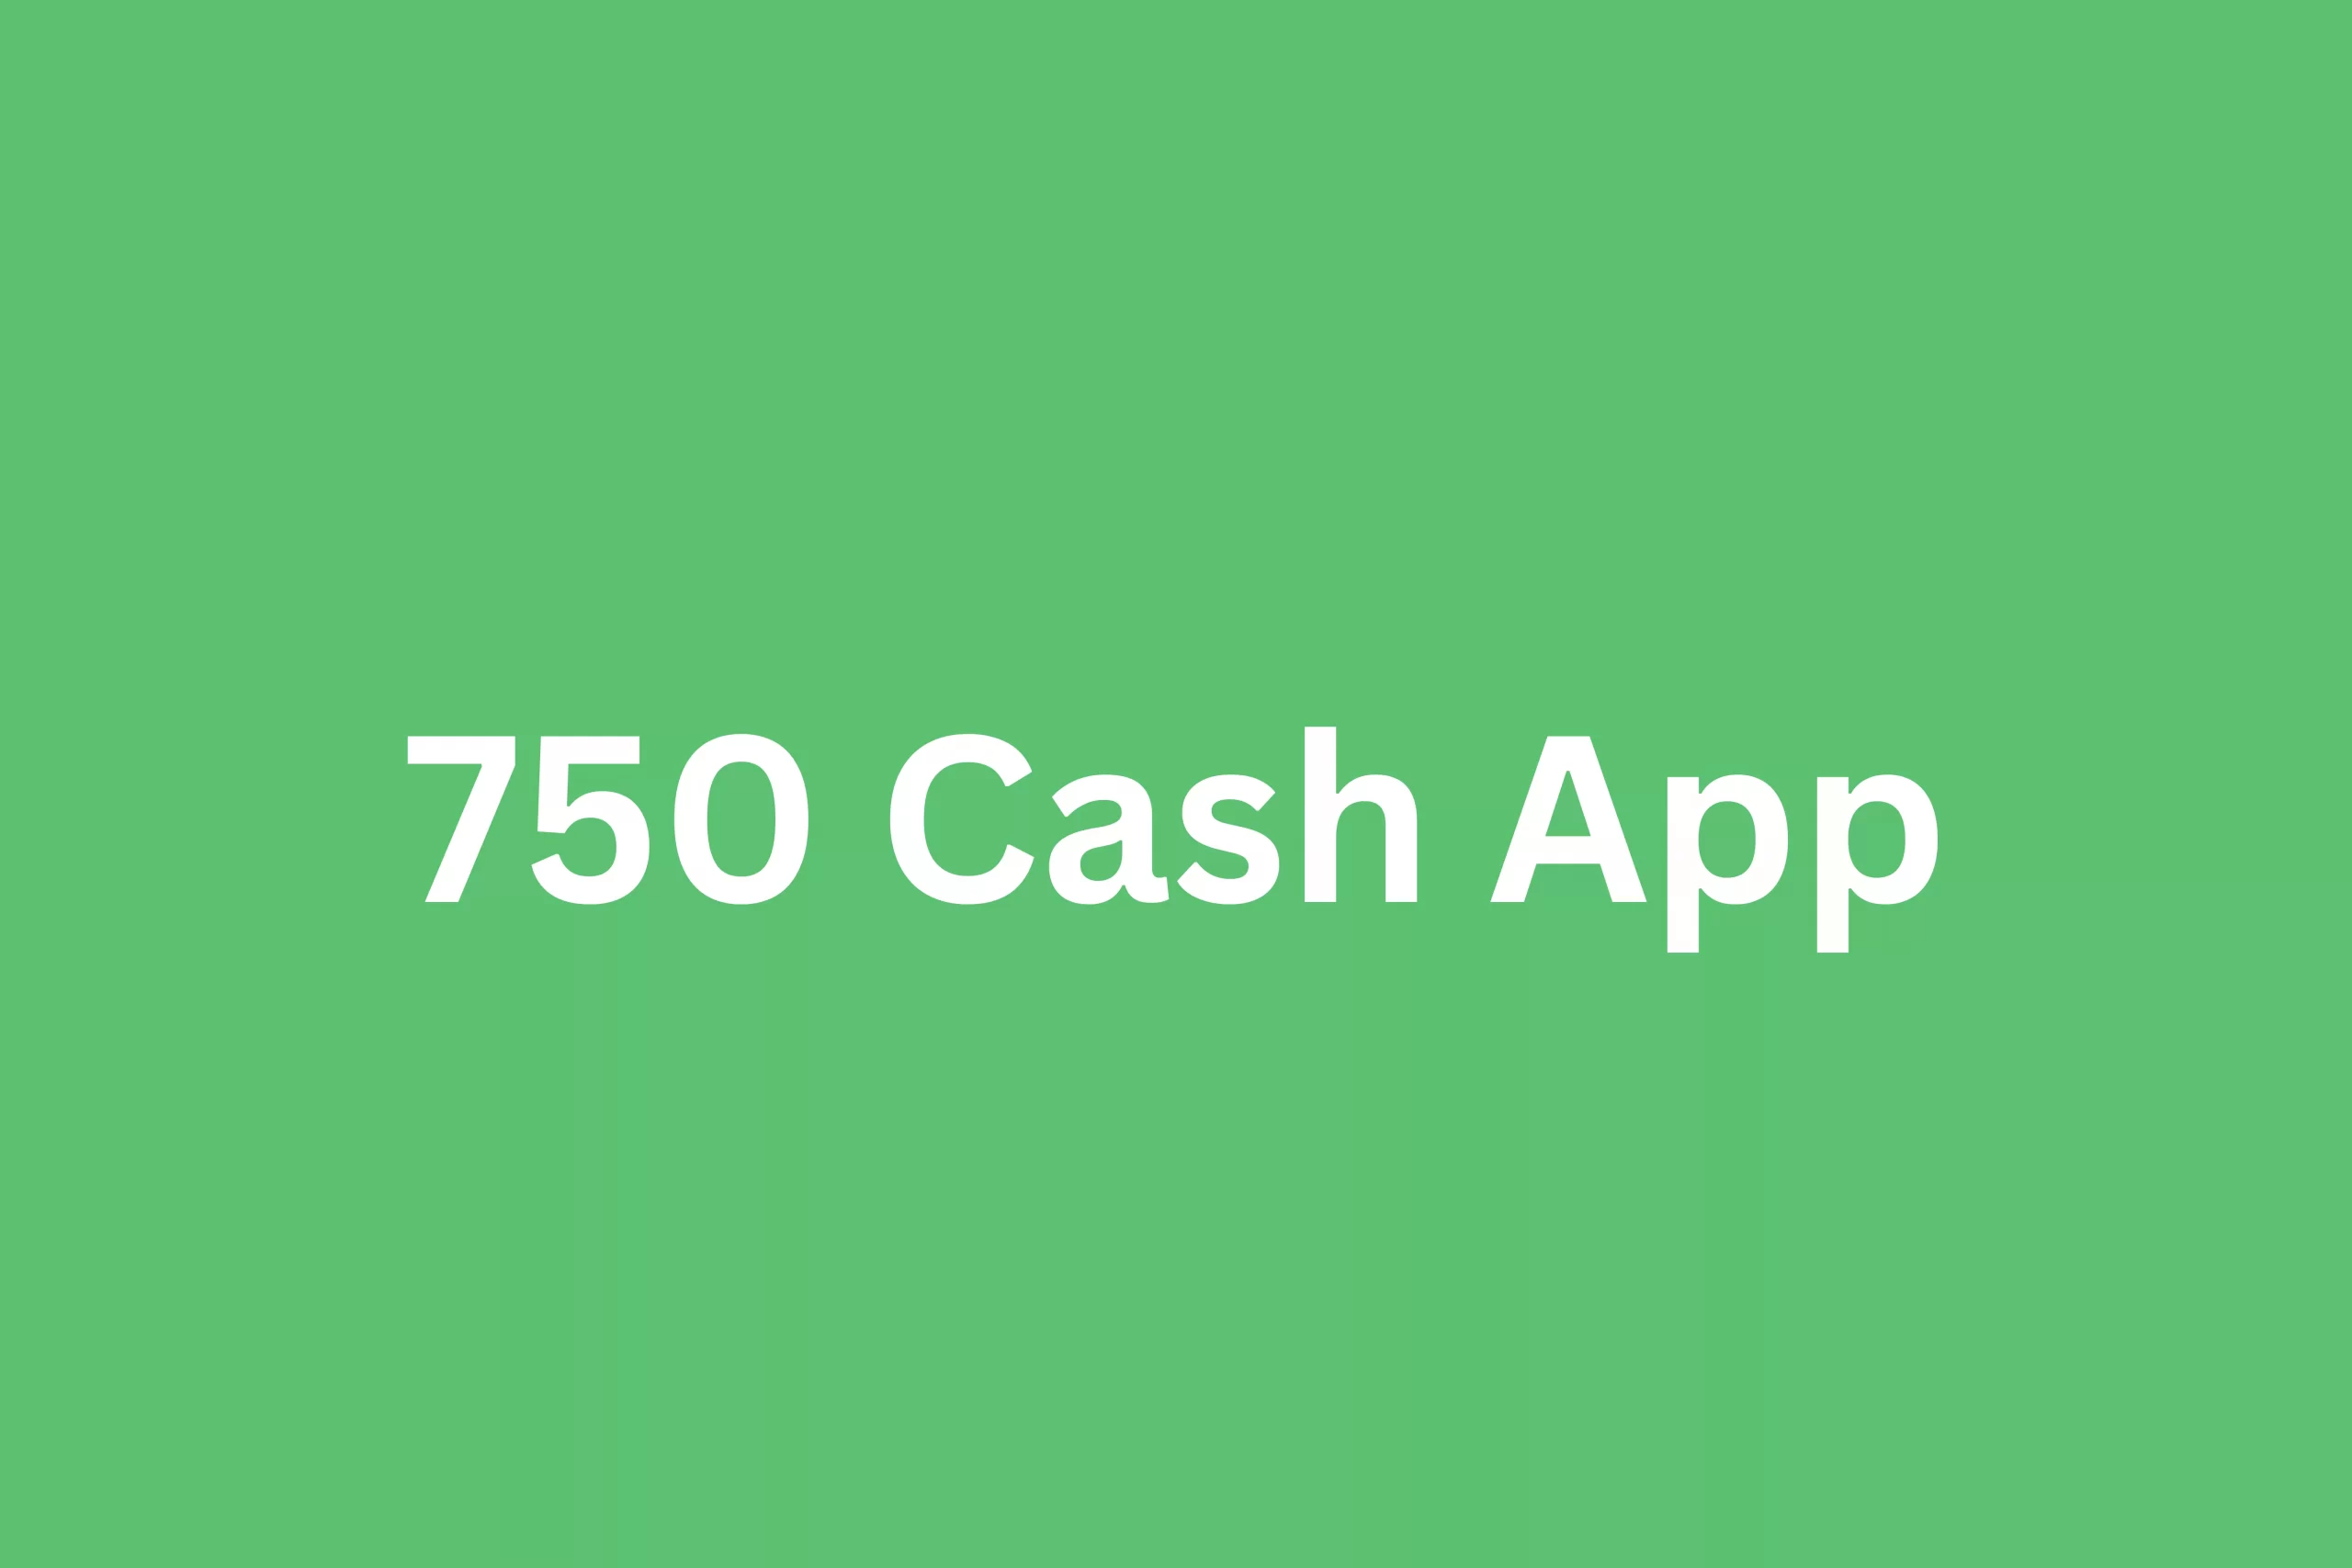 Cash App 750 Reward – Is It real and Legit? How To Get 750 On Cash App?